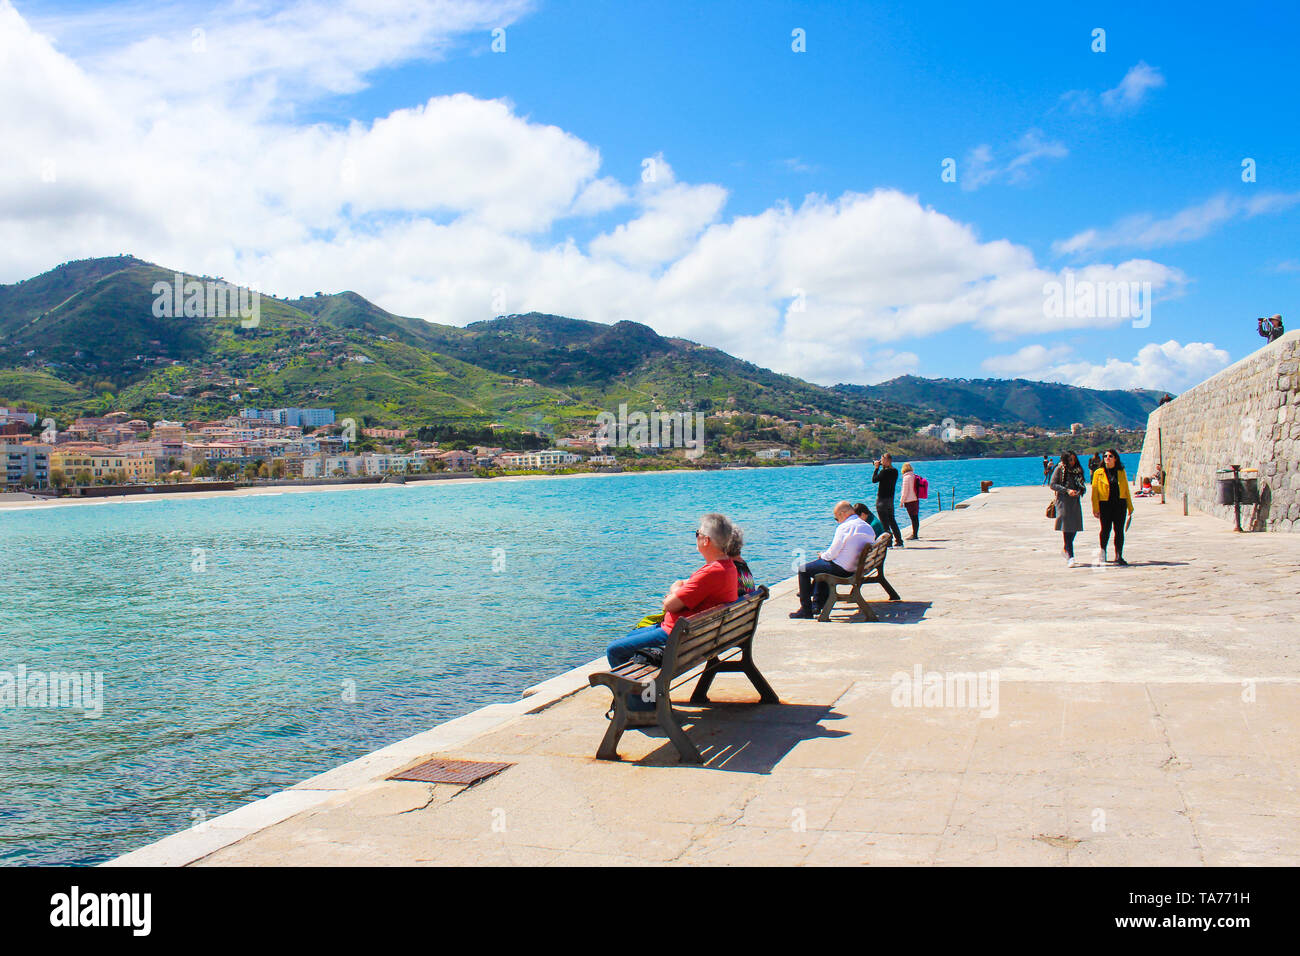 Cefalu, Sicily, Italy - April 7th 2019: People relaxing on the pier on Tyrrhenian coast in Sicilian city. Taken on a sunny day with blue sky. Tourists spending free time. Stock Photo